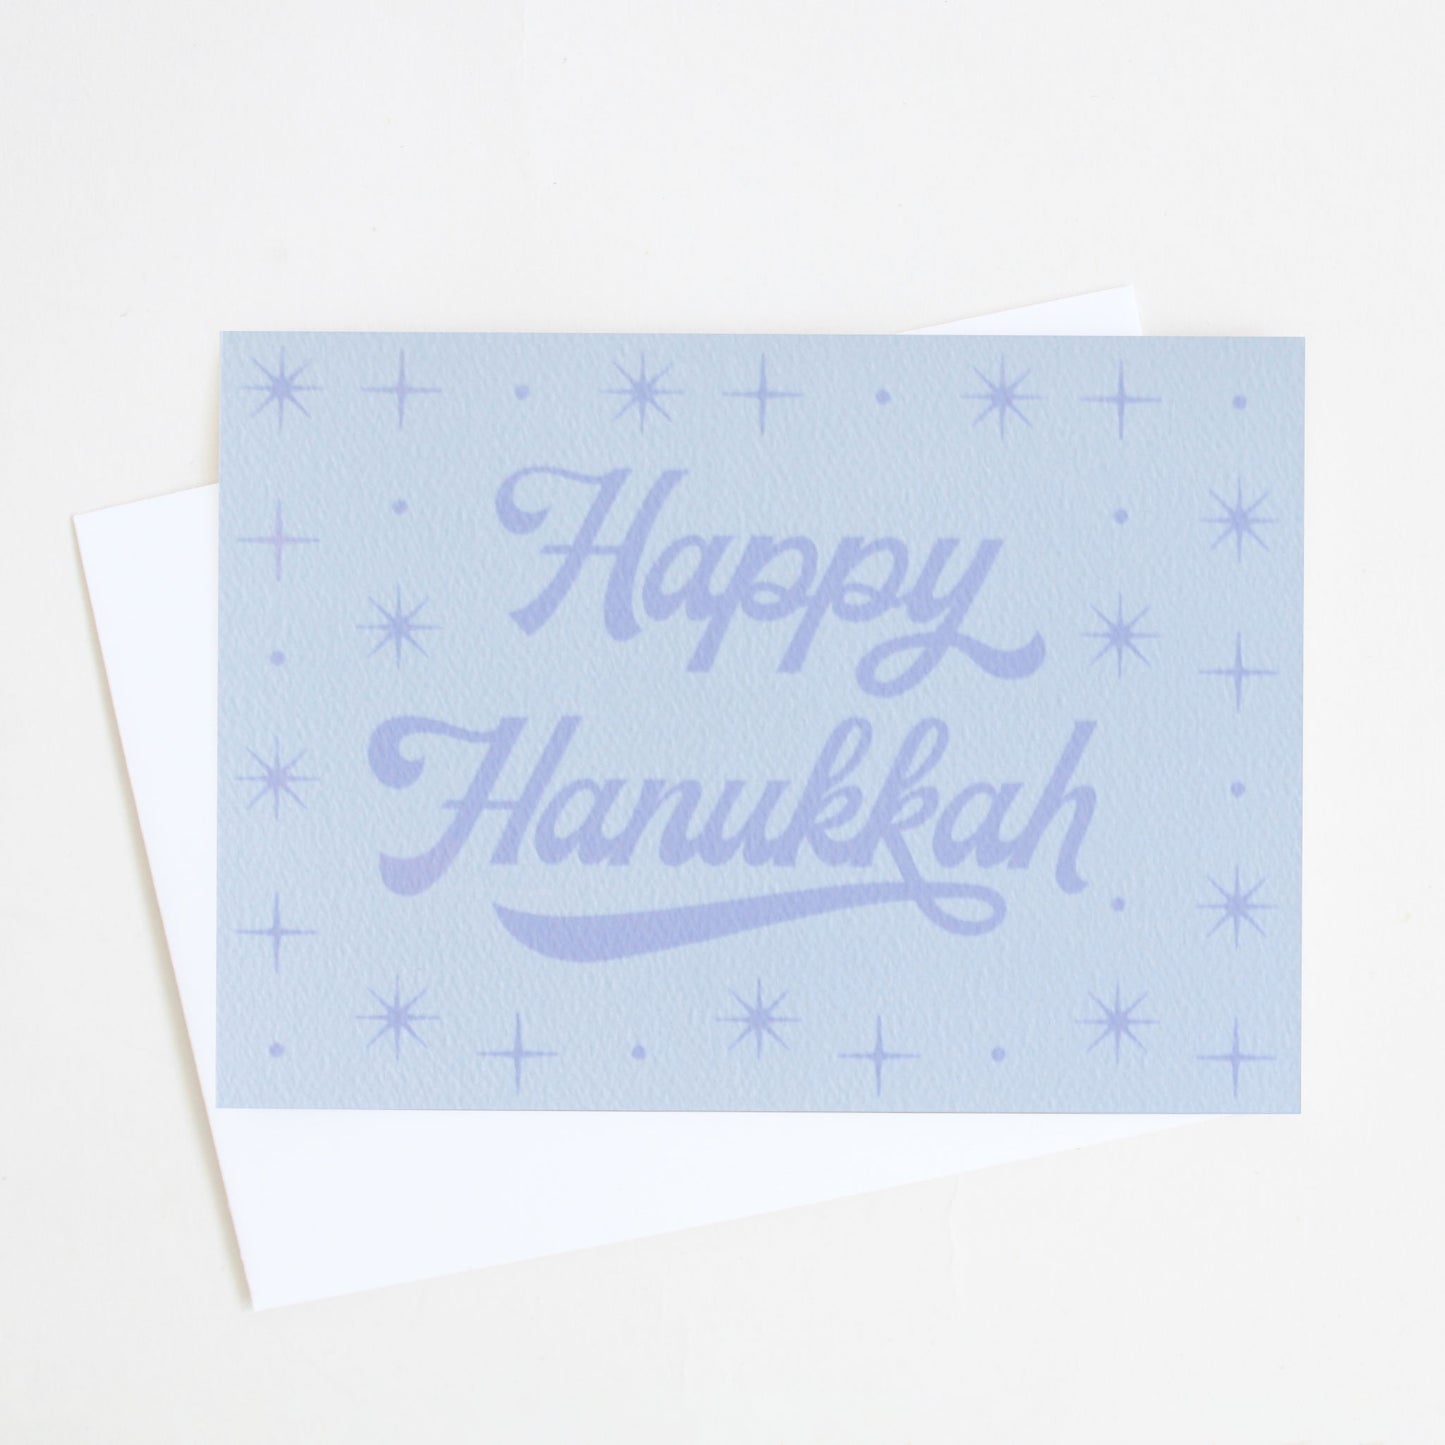 A light blue holiday card that reads, "Happy Hanukkah" along with various star designs and accompanied by a white envelope.